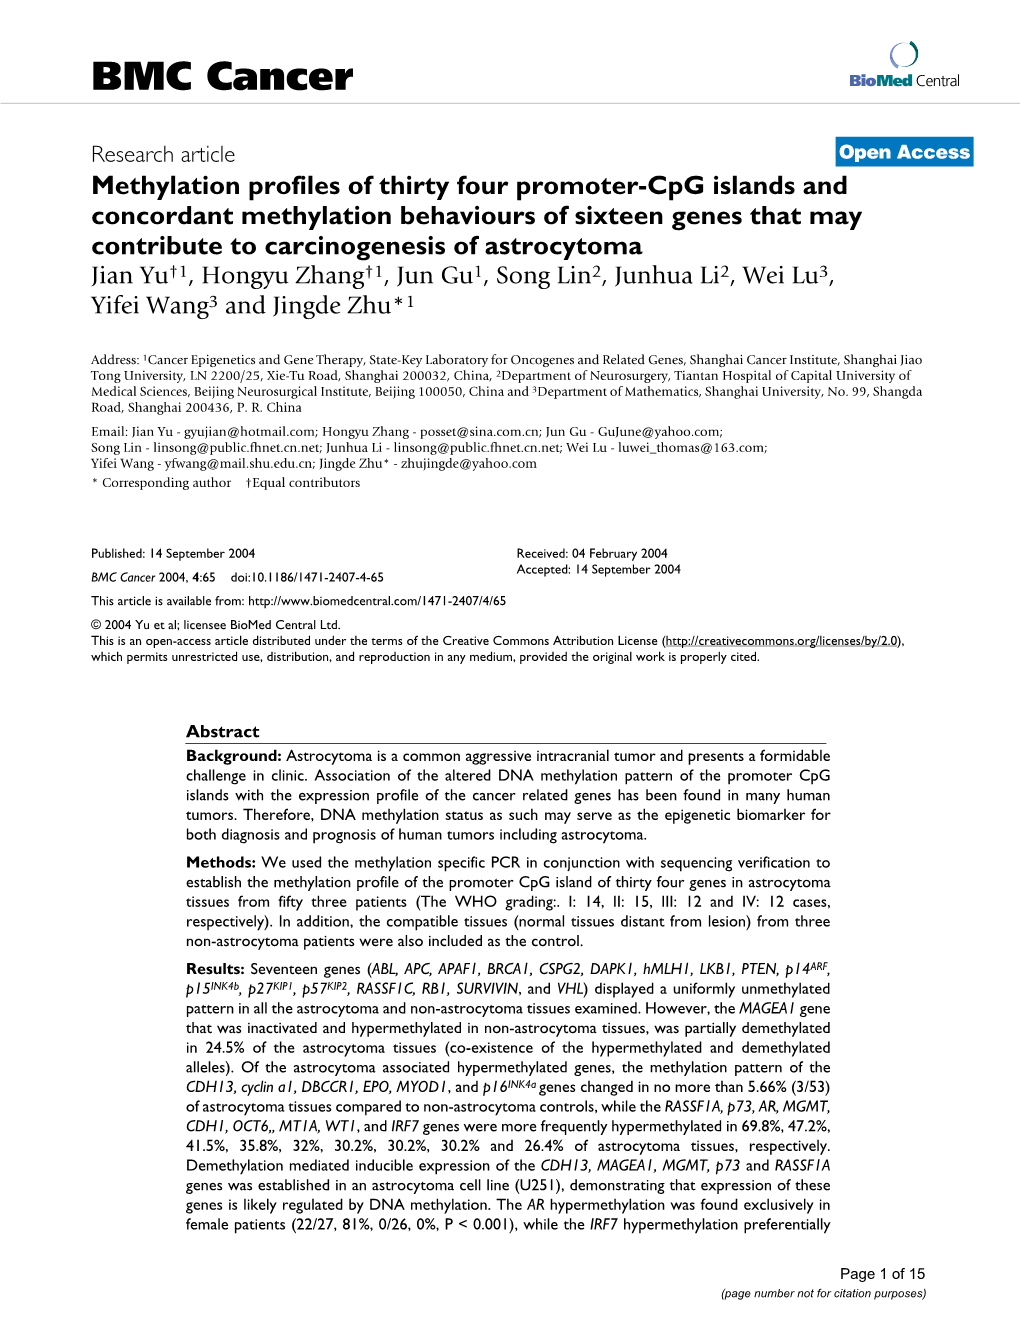 Methylation Profiles of Thirty Four Promoter-Cpg Islands And